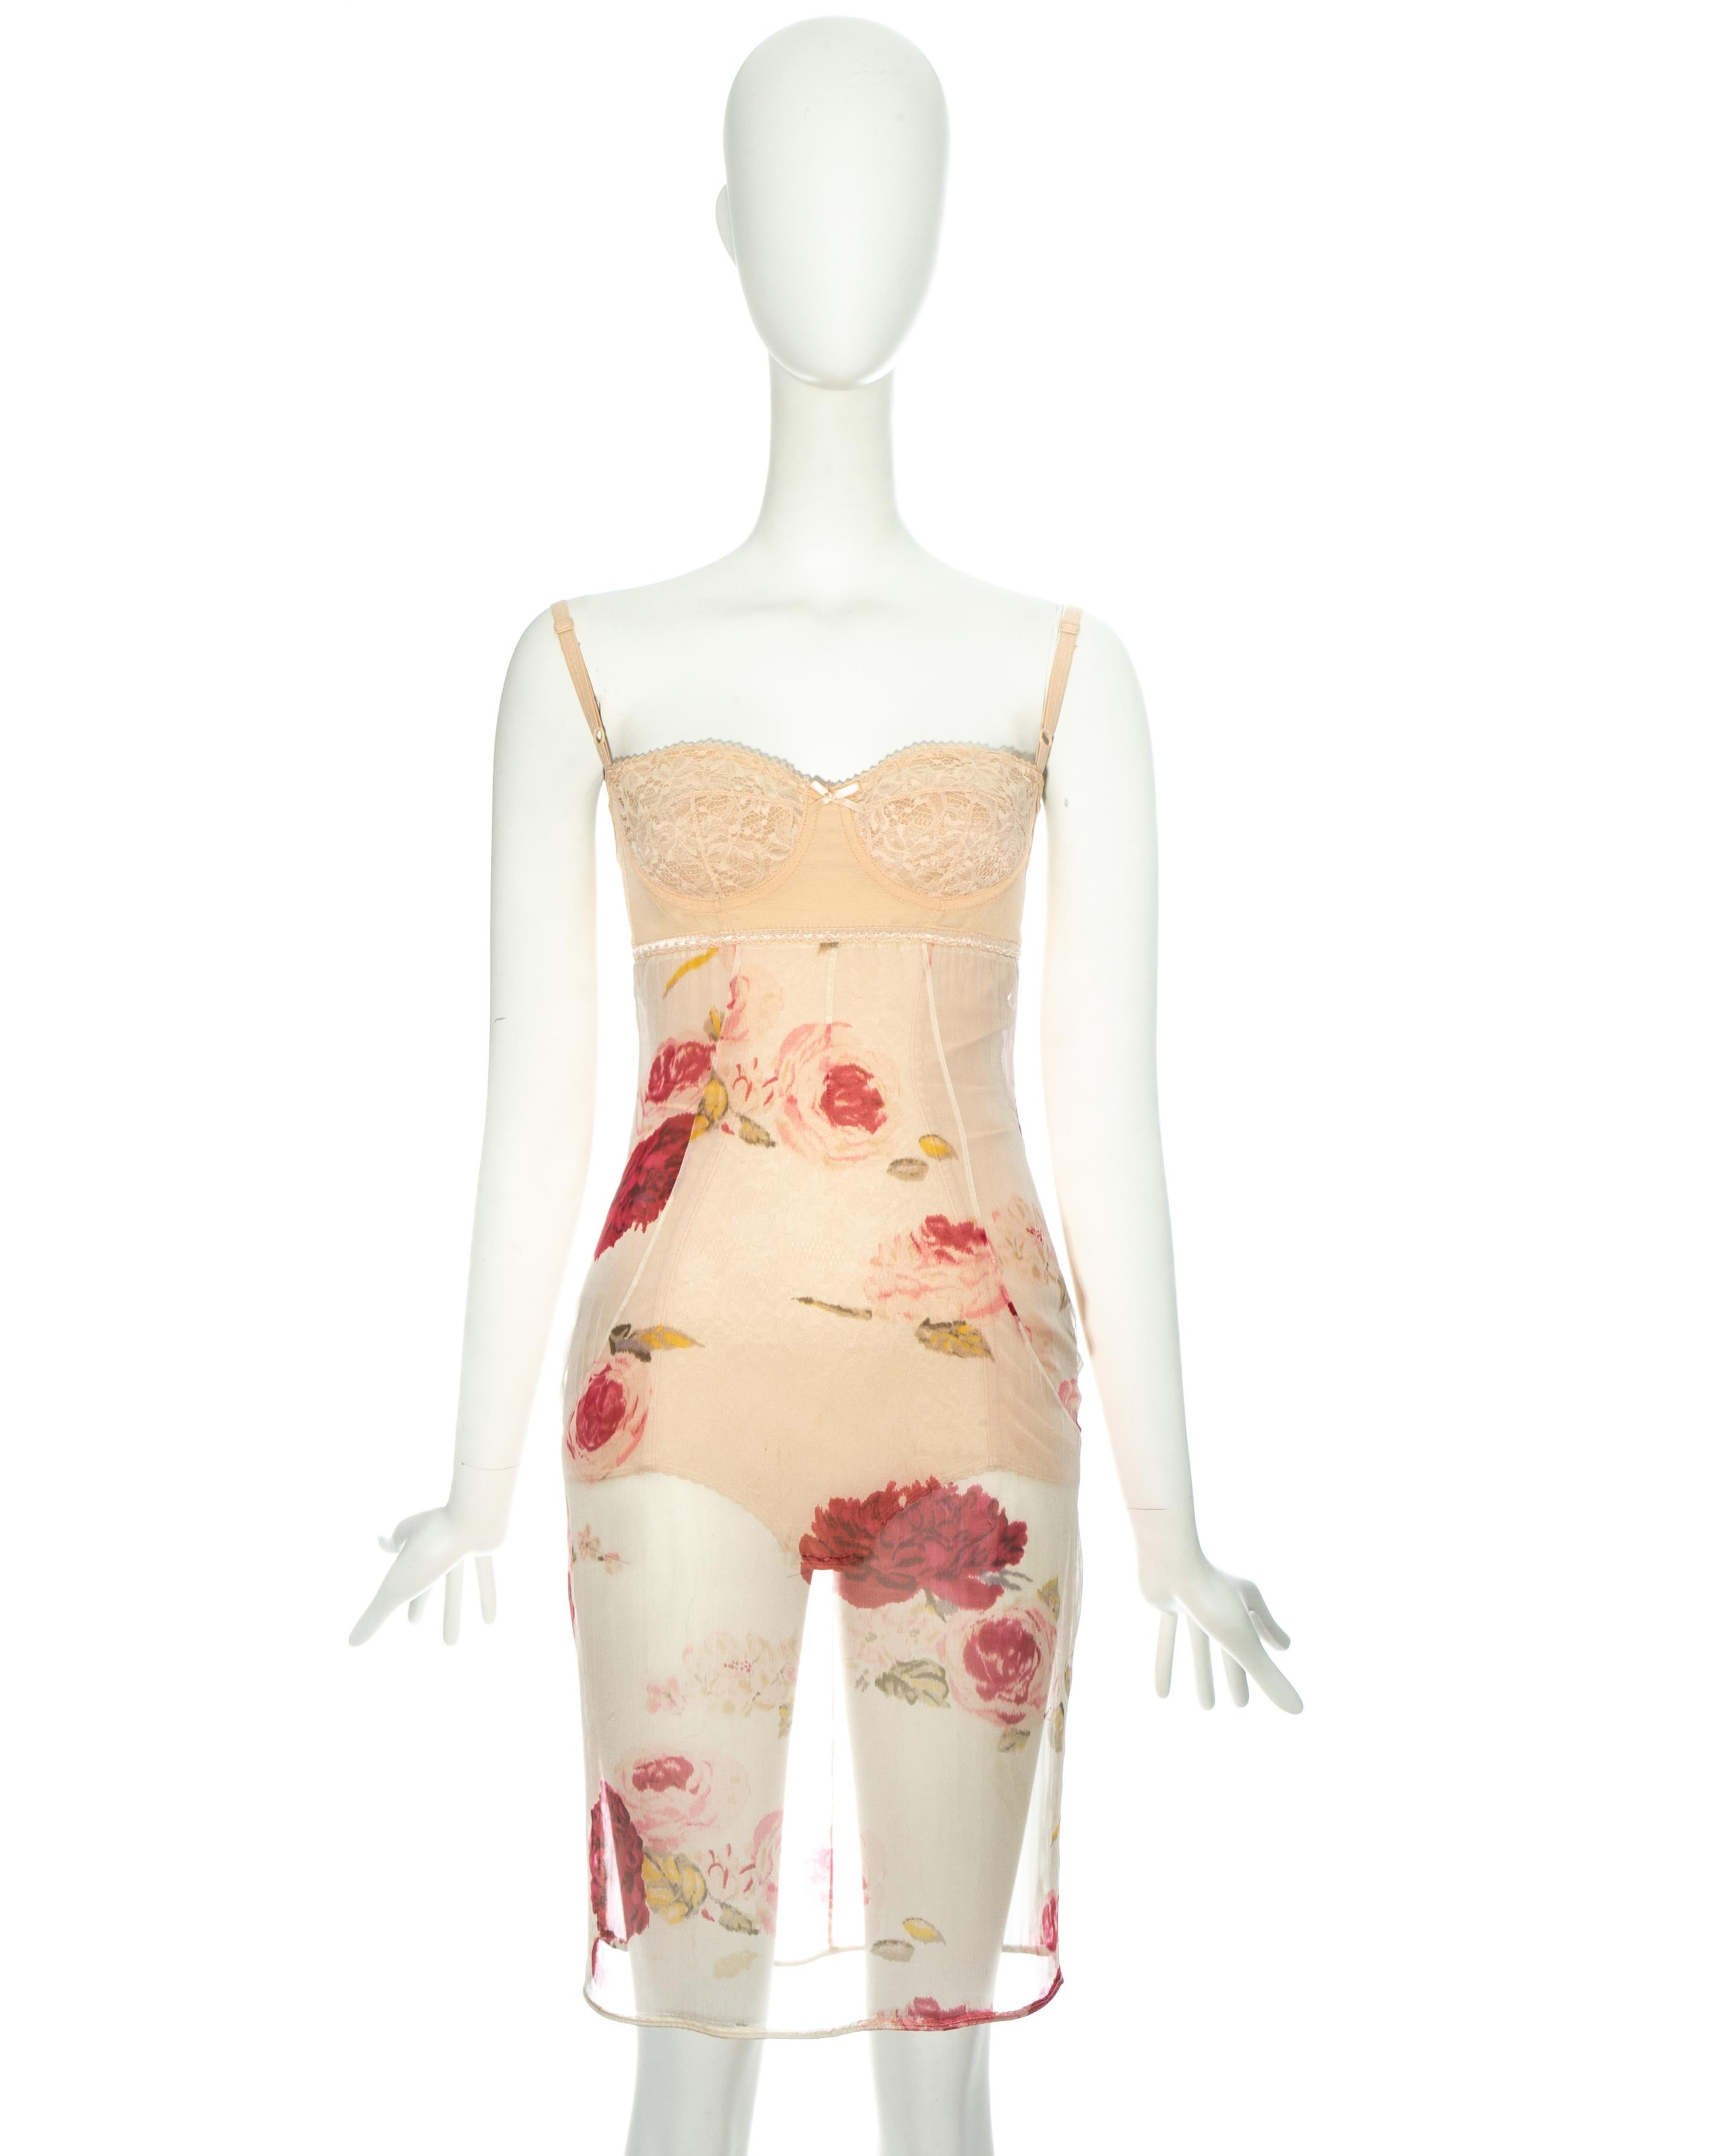 Dolce & Gabbana nude floral printed silk chiffon evening dress with attached corseted spandex bodysuit.

Fall-Winter 1996